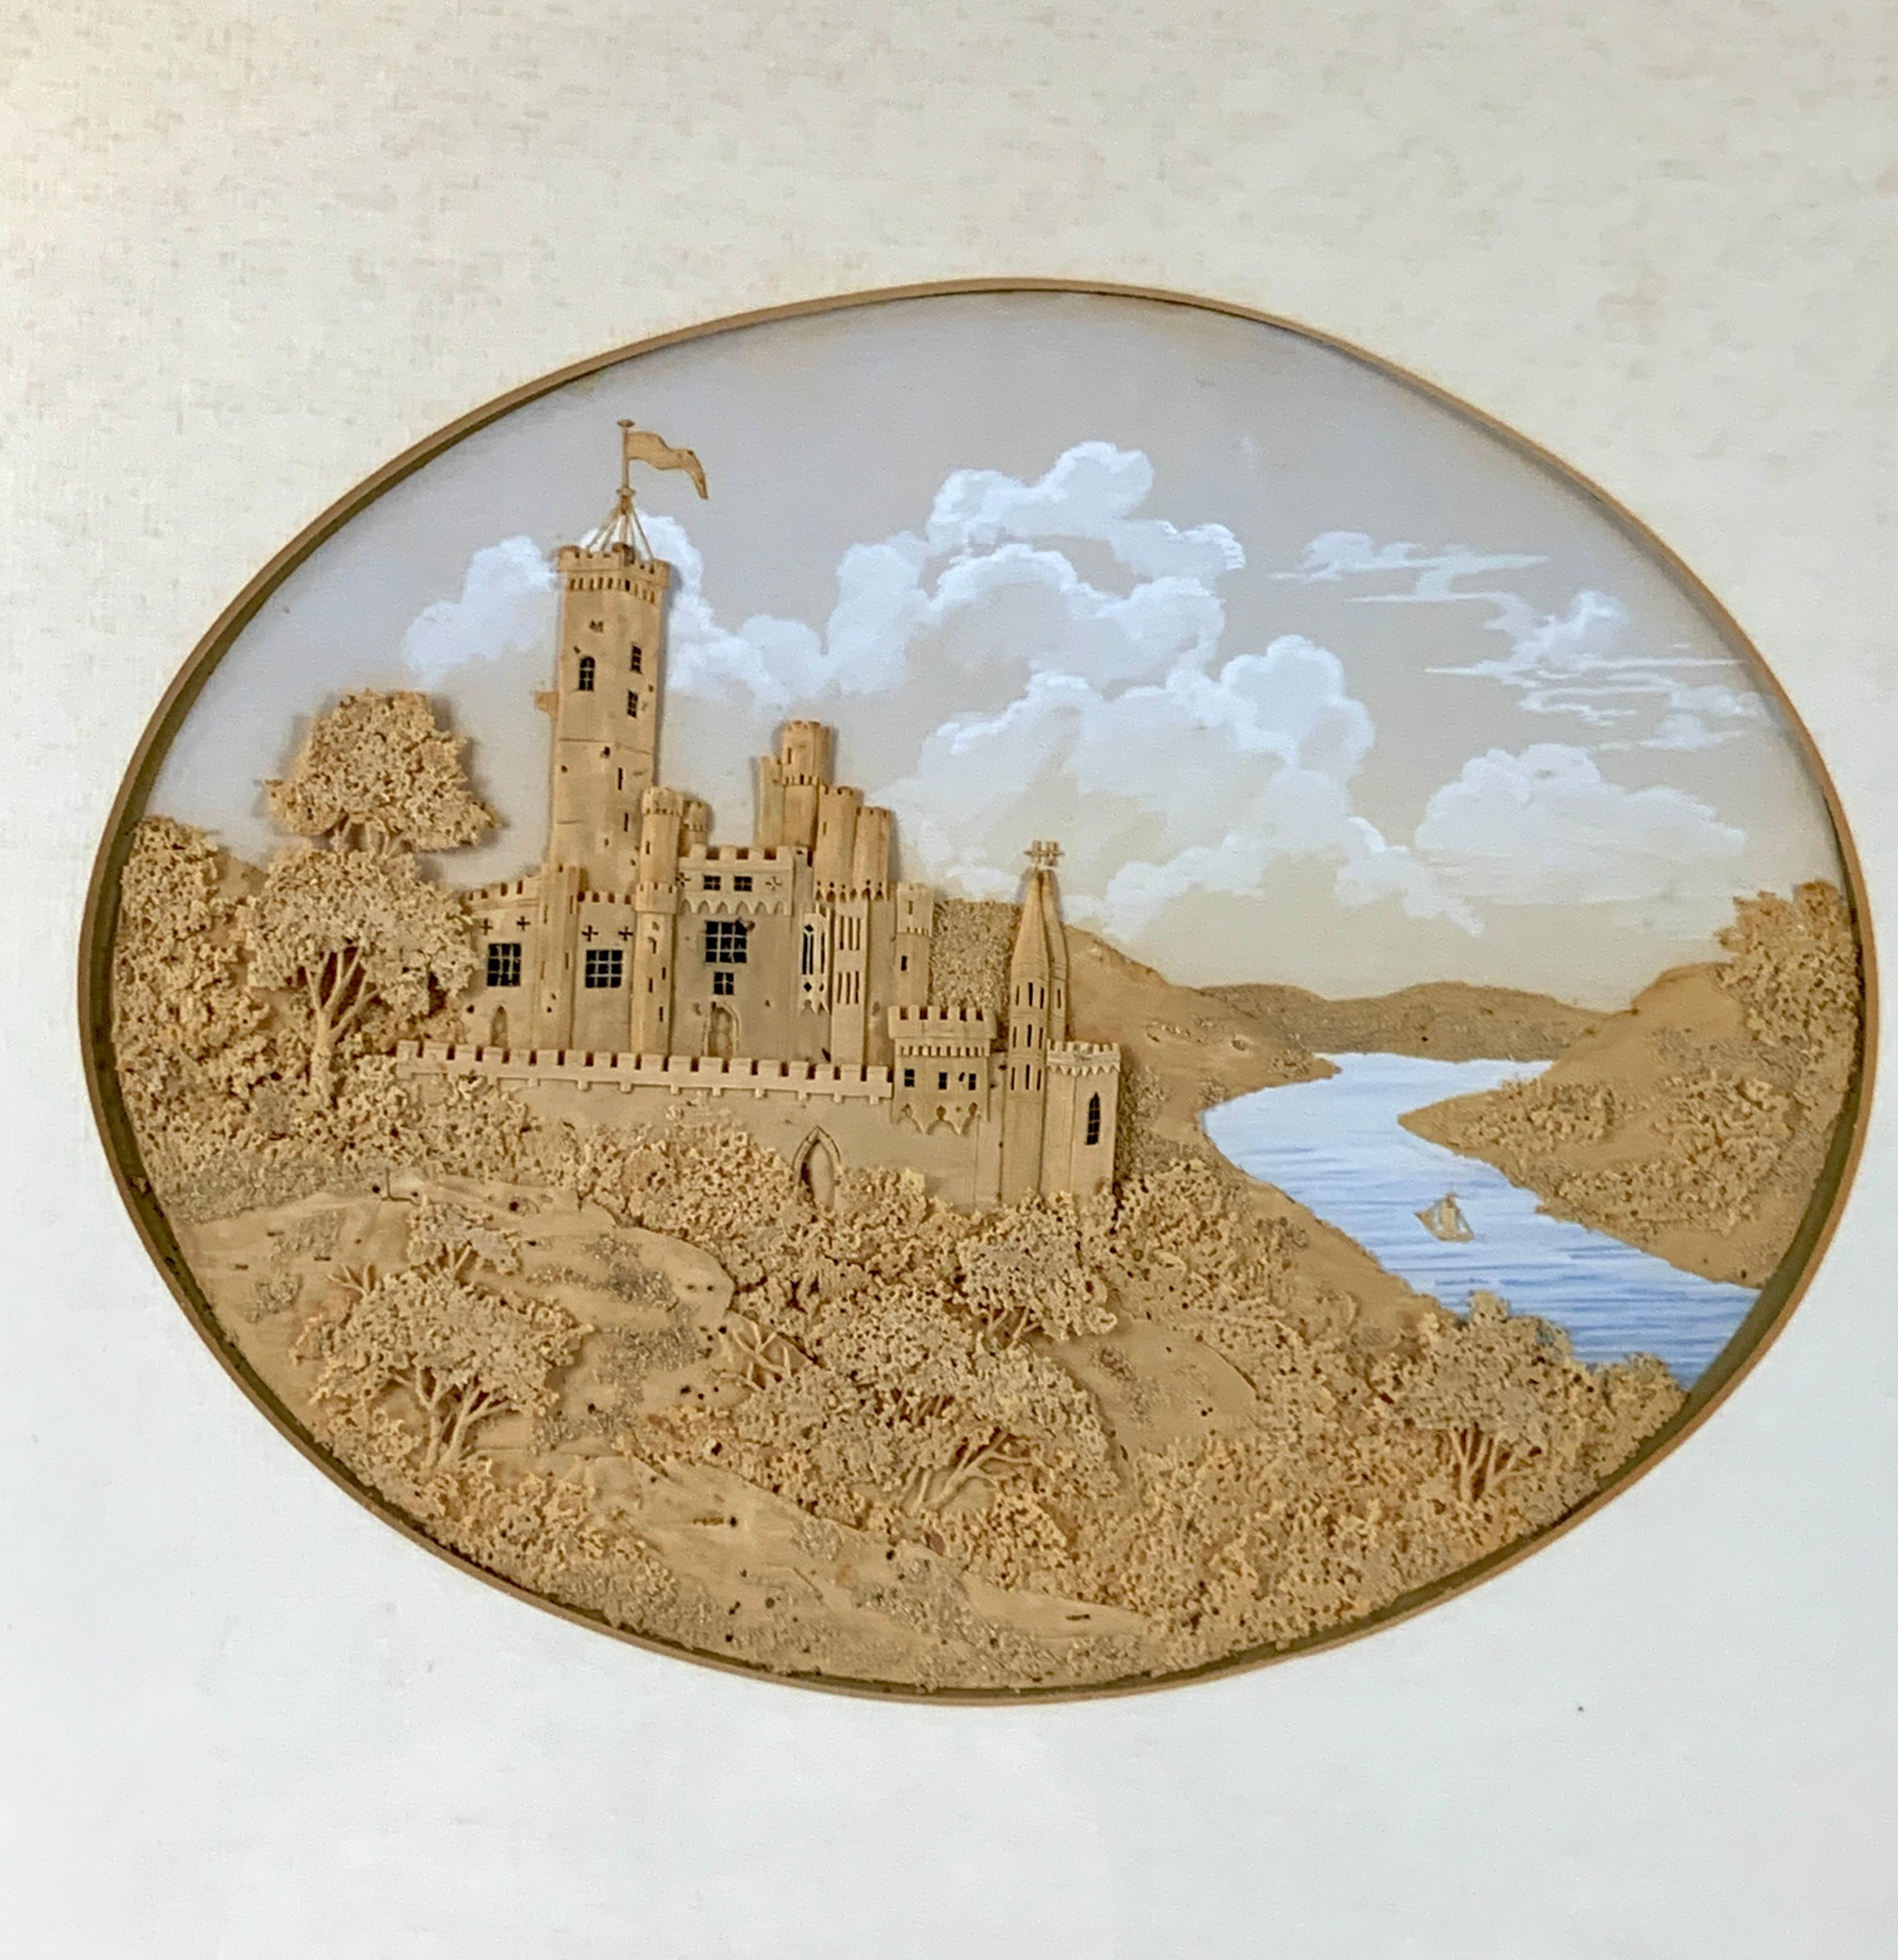  This mid 19th century cork work shows a romantic scene of an ancient castle in a charming diorama. The castle is perched atop a promontory overlooking a river, complete with forested terrain and a tiny sailboat for scale. The artist's intricate